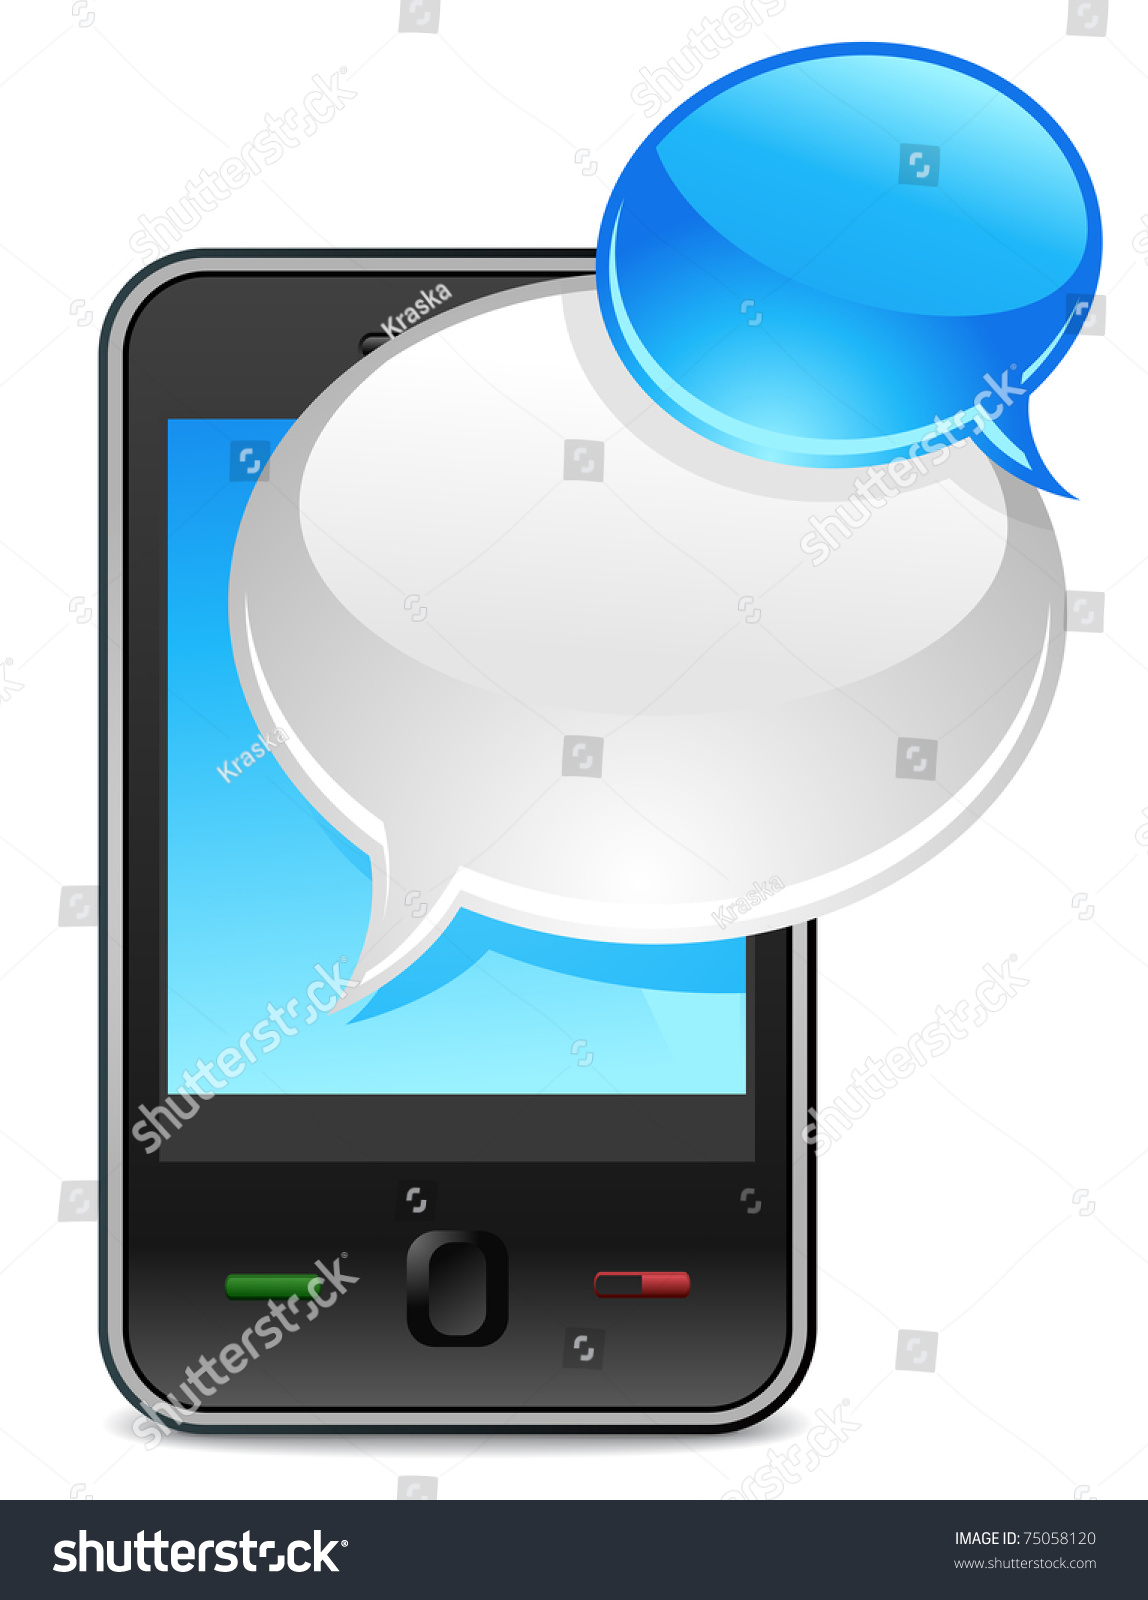 clipart for cell phone texting - photo #10